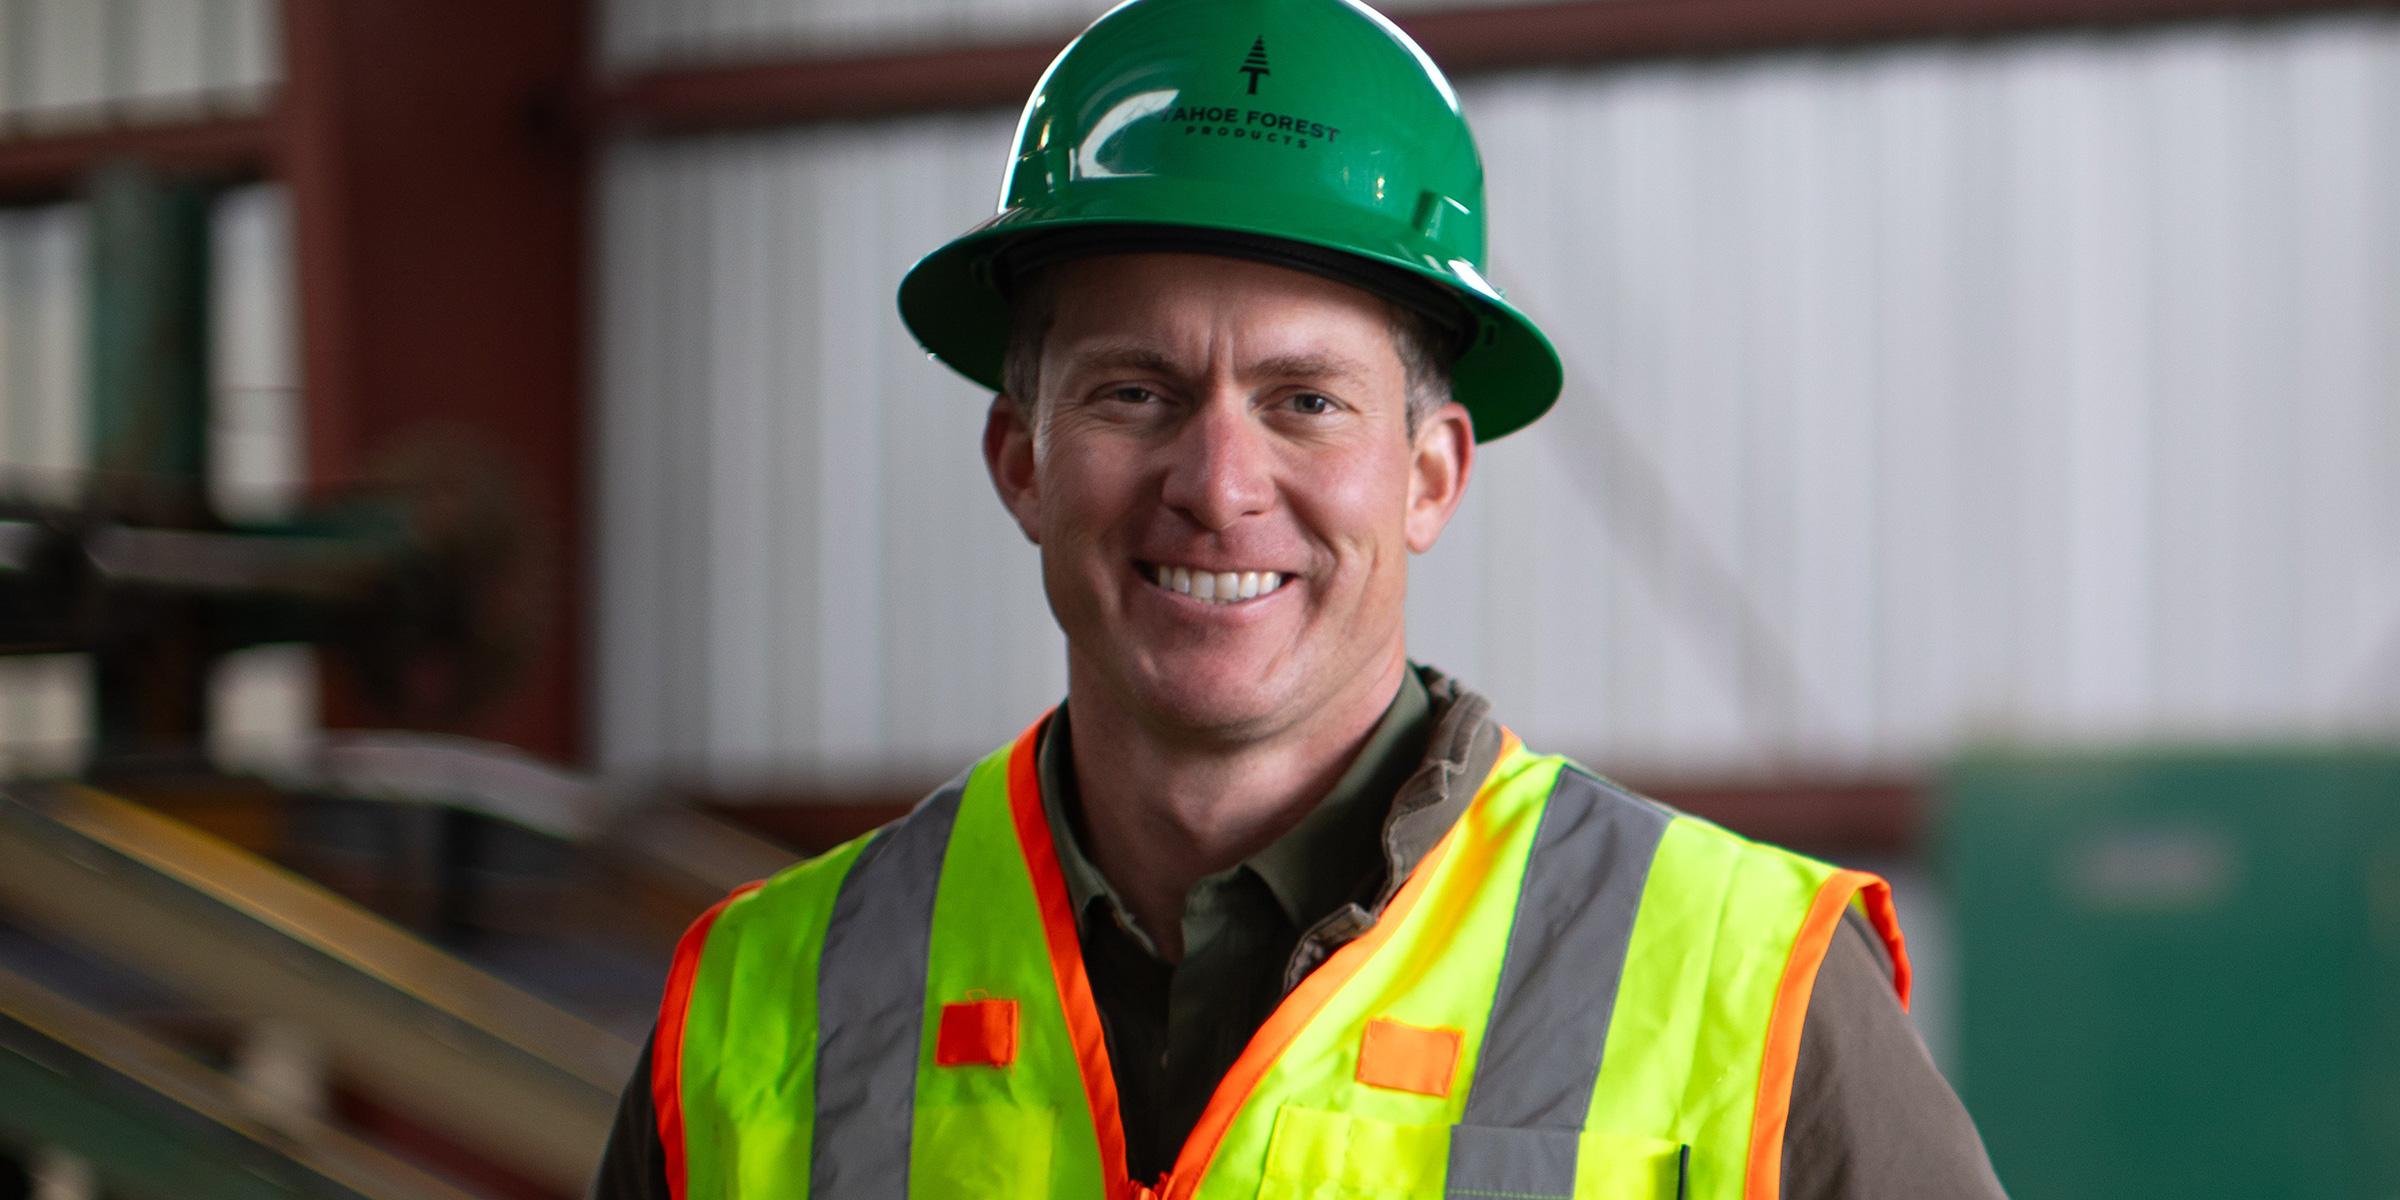 Man in green hardhat and safety vest standing near a saw mill